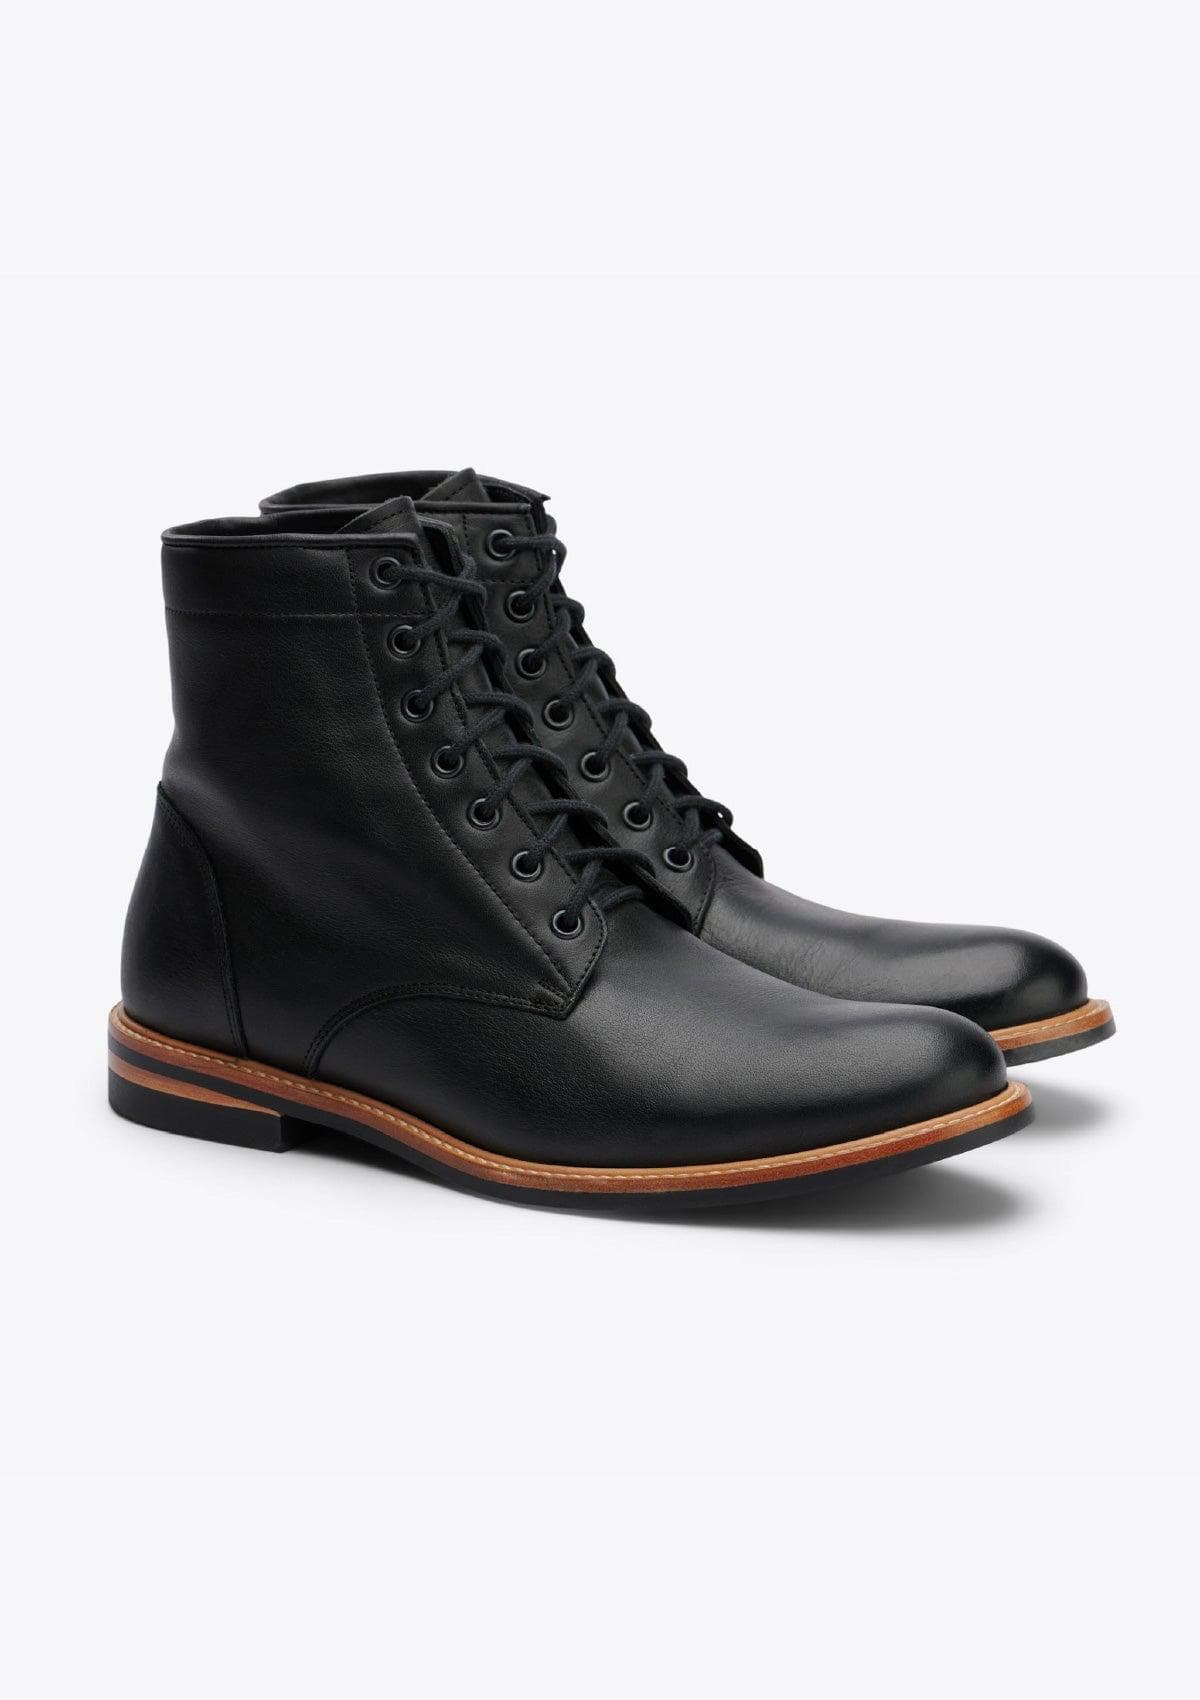 All-Weather Andres Boots - Black